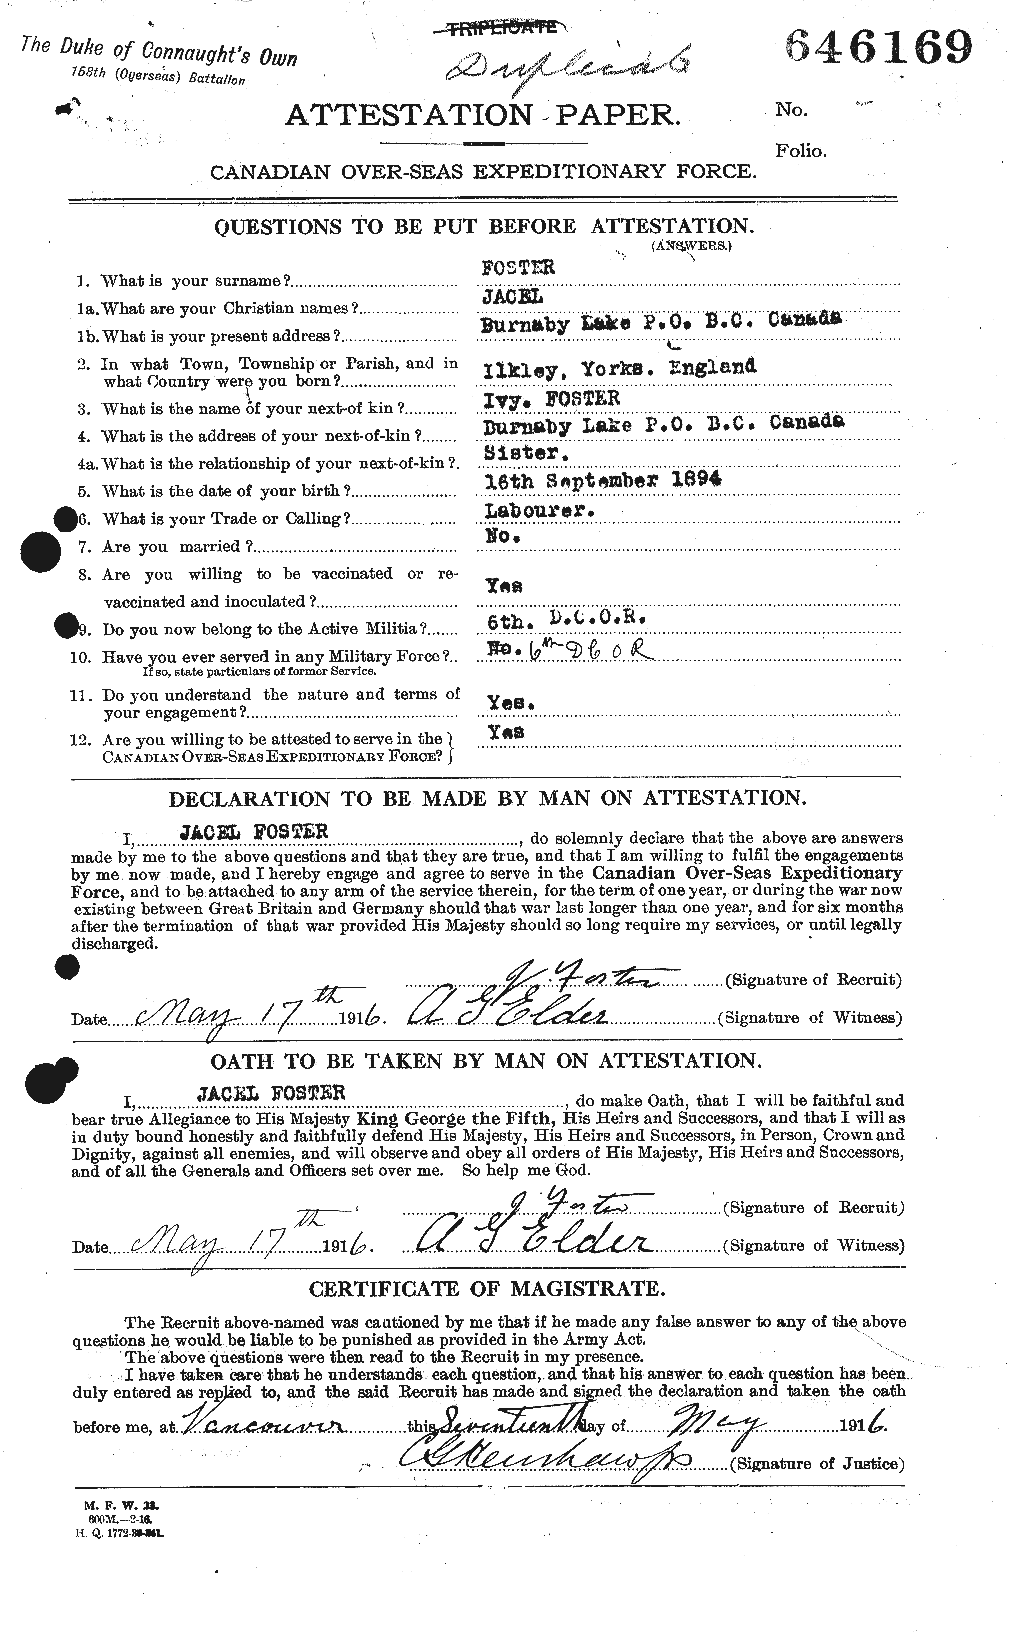 Personnel Records of the First World War - CEF 333272a